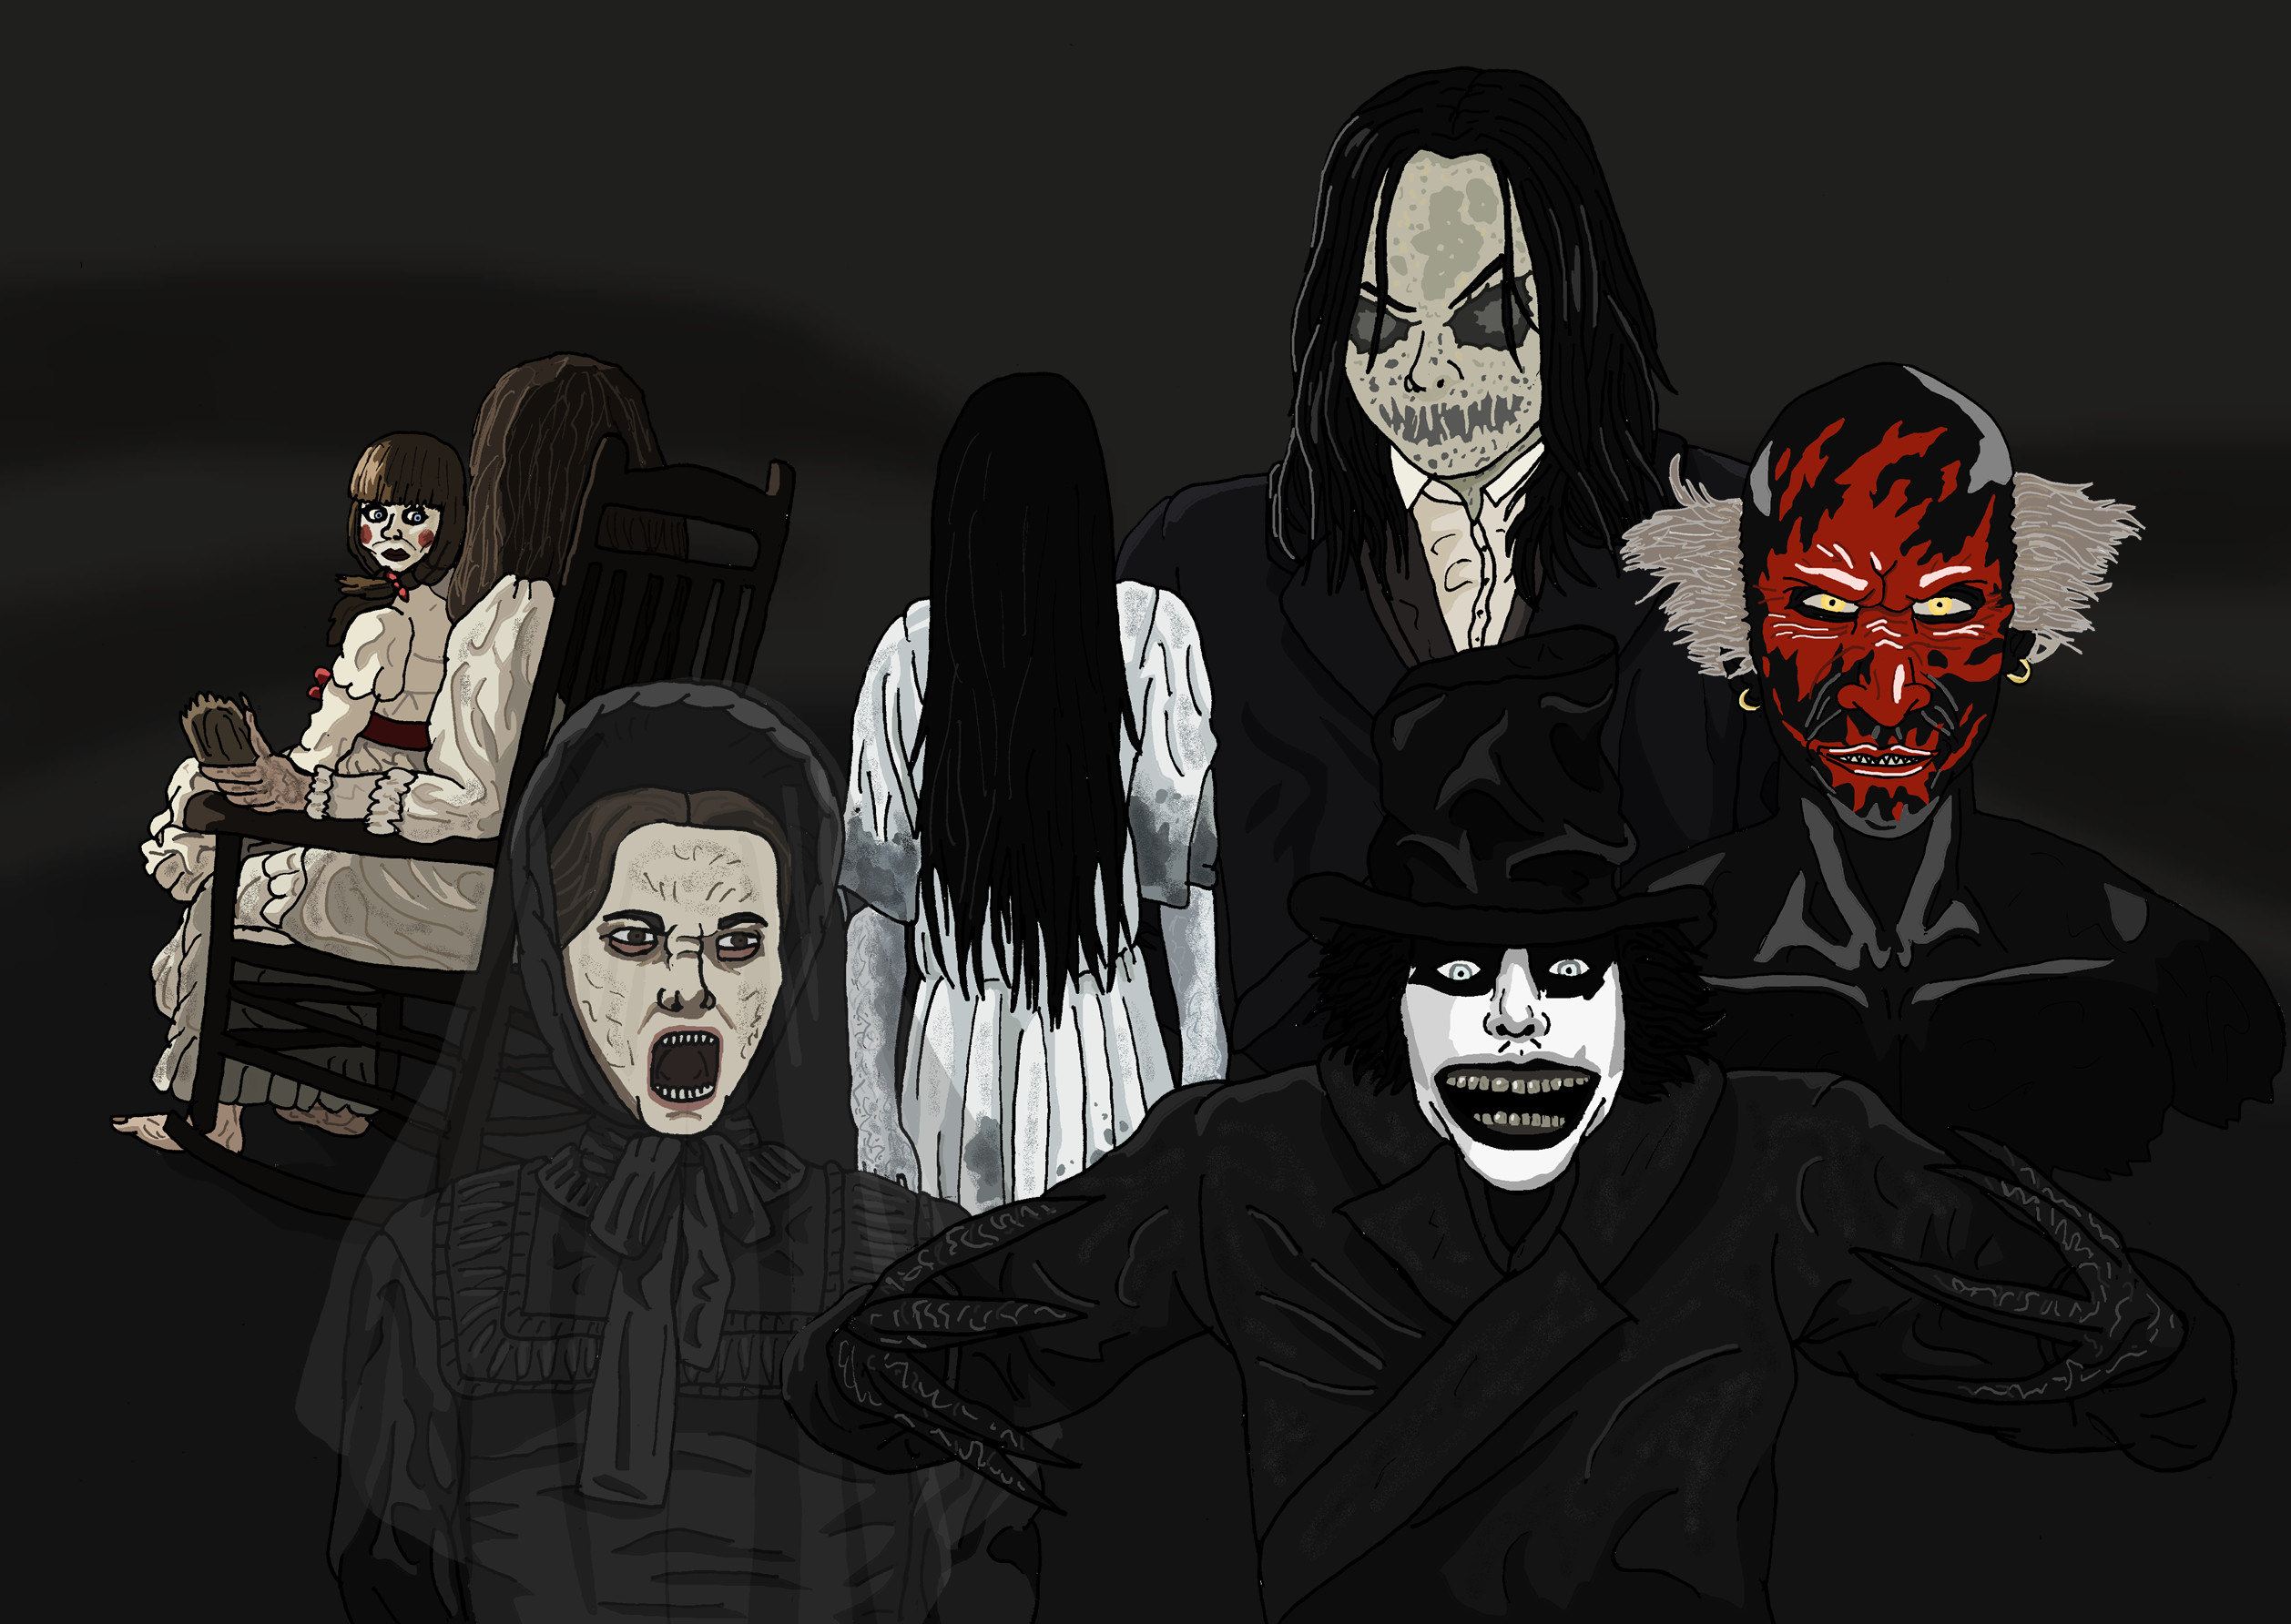 2516x1784 ... Demonic and Ghostly Horror Icons - OMM26 by Juggernaut-Art